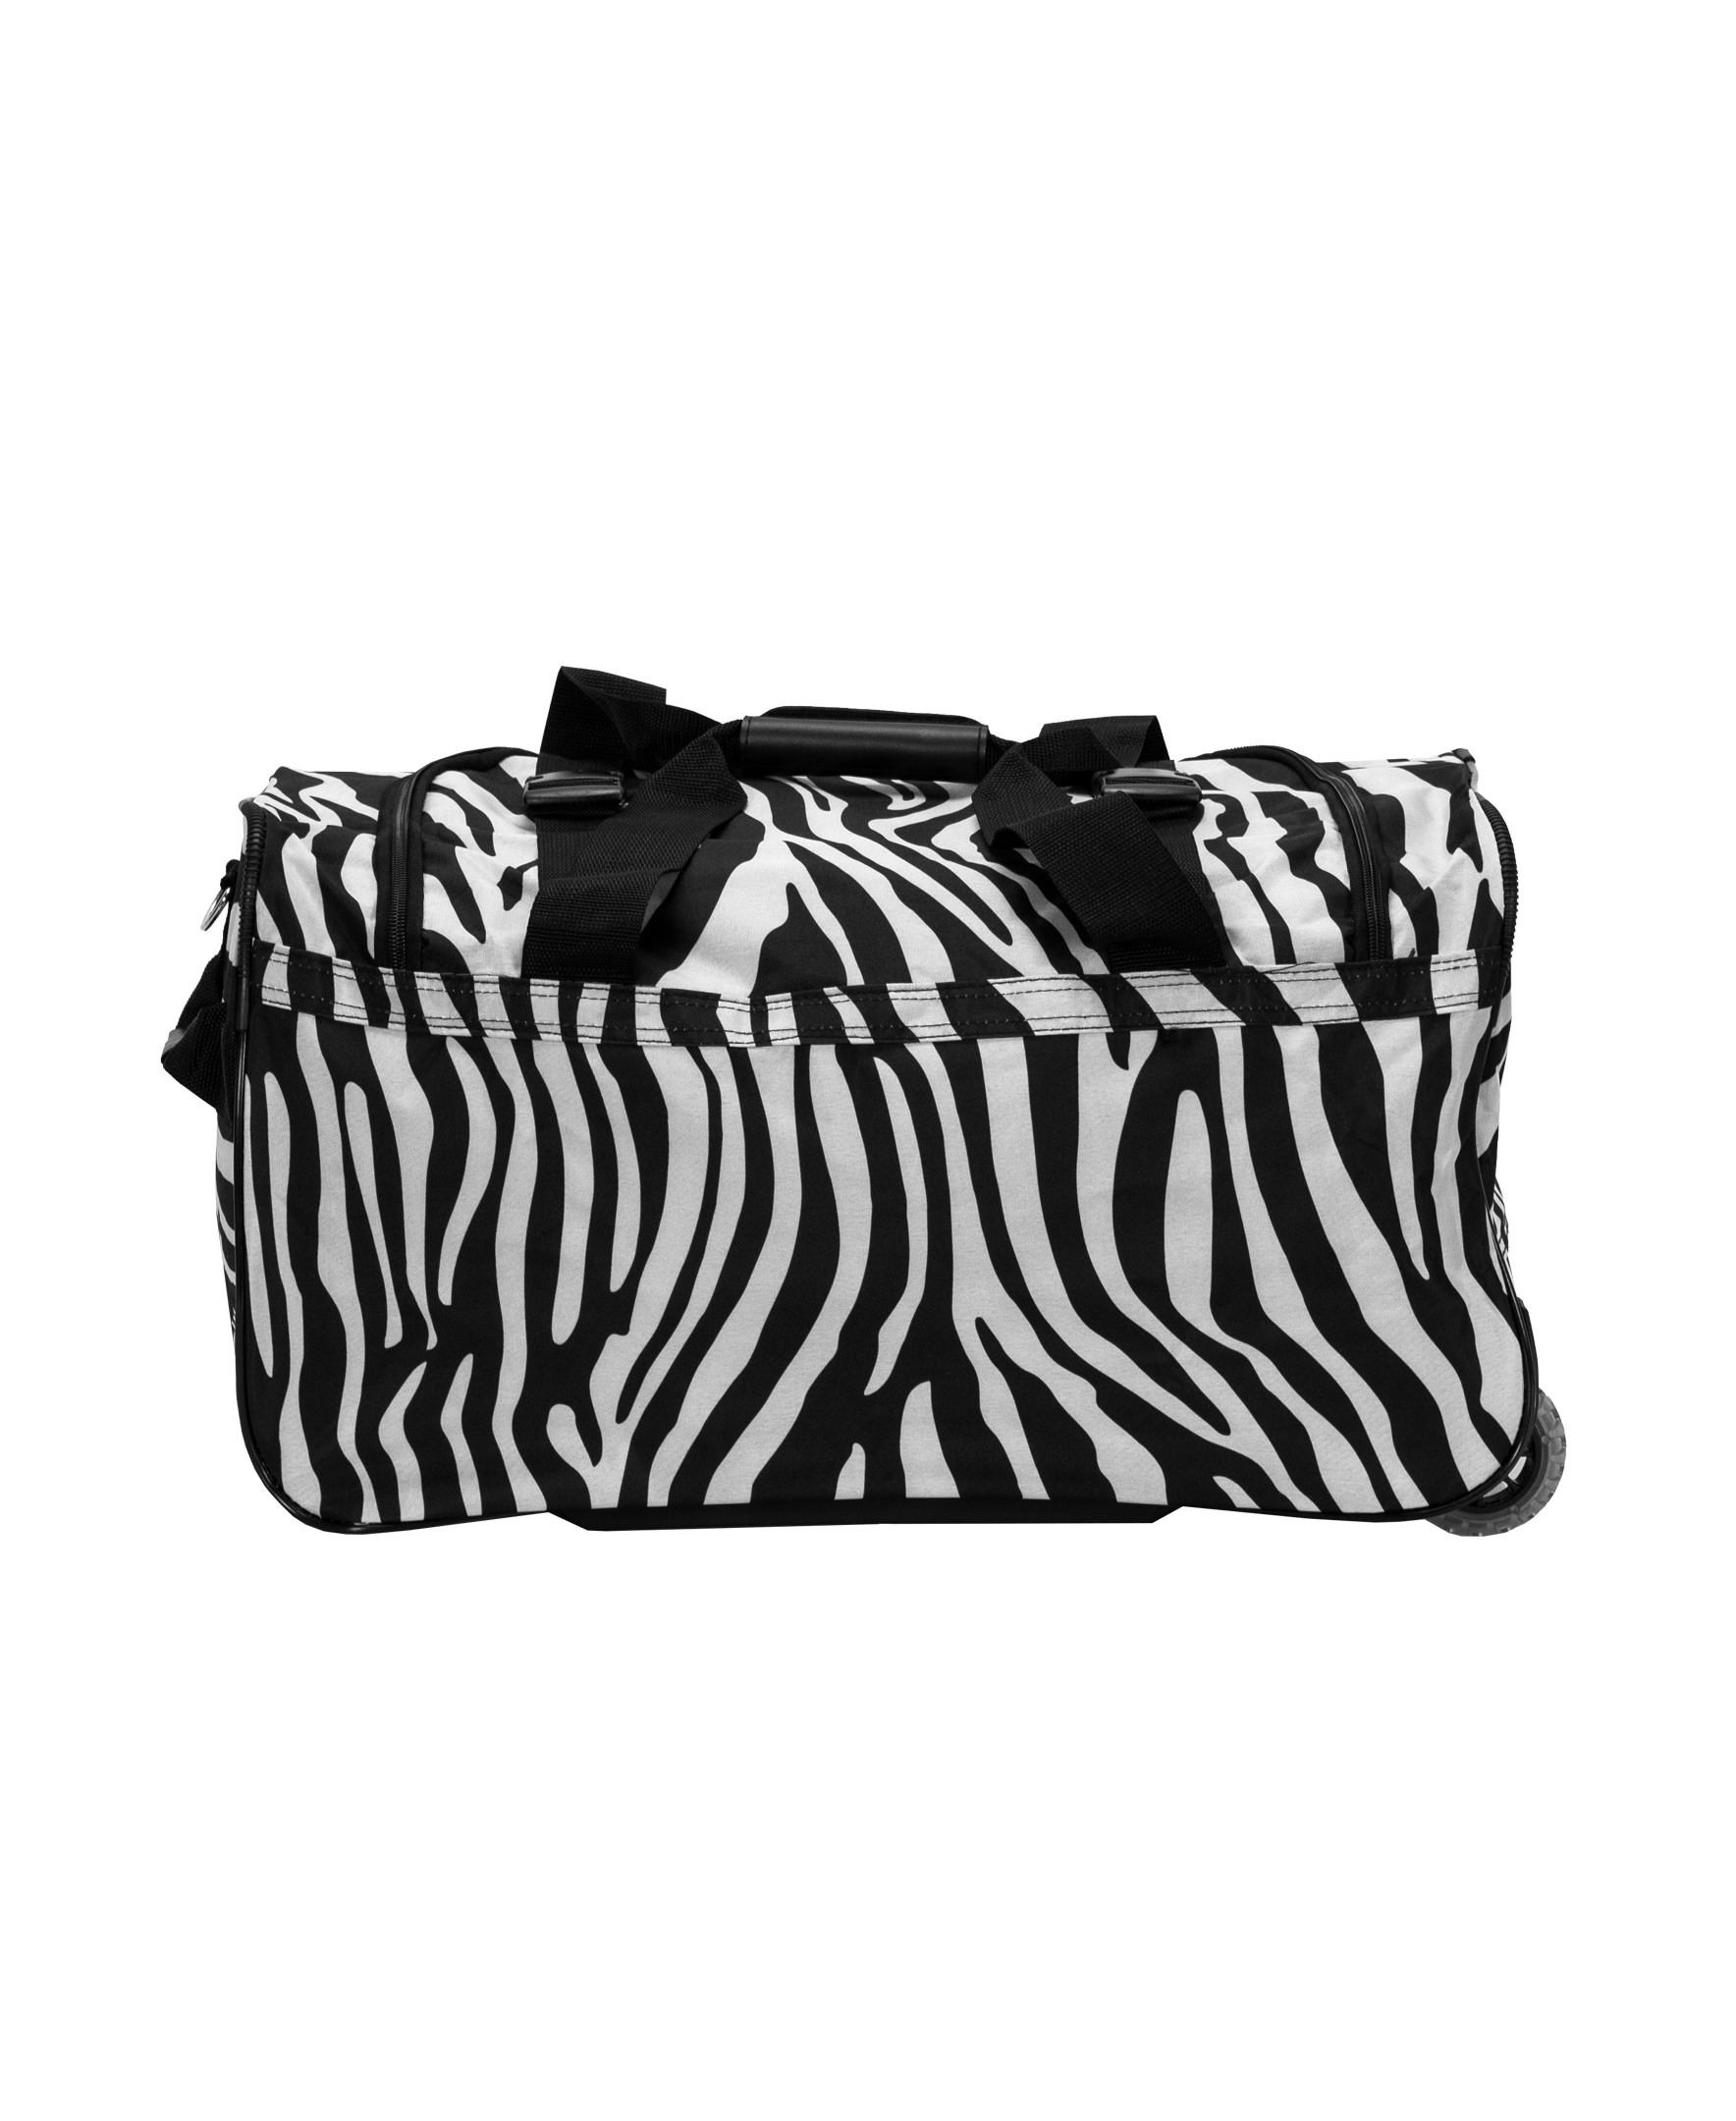 Rockland Luggage 22 Rolling Duffle Bag, Multiple Colors - image 2 of 6